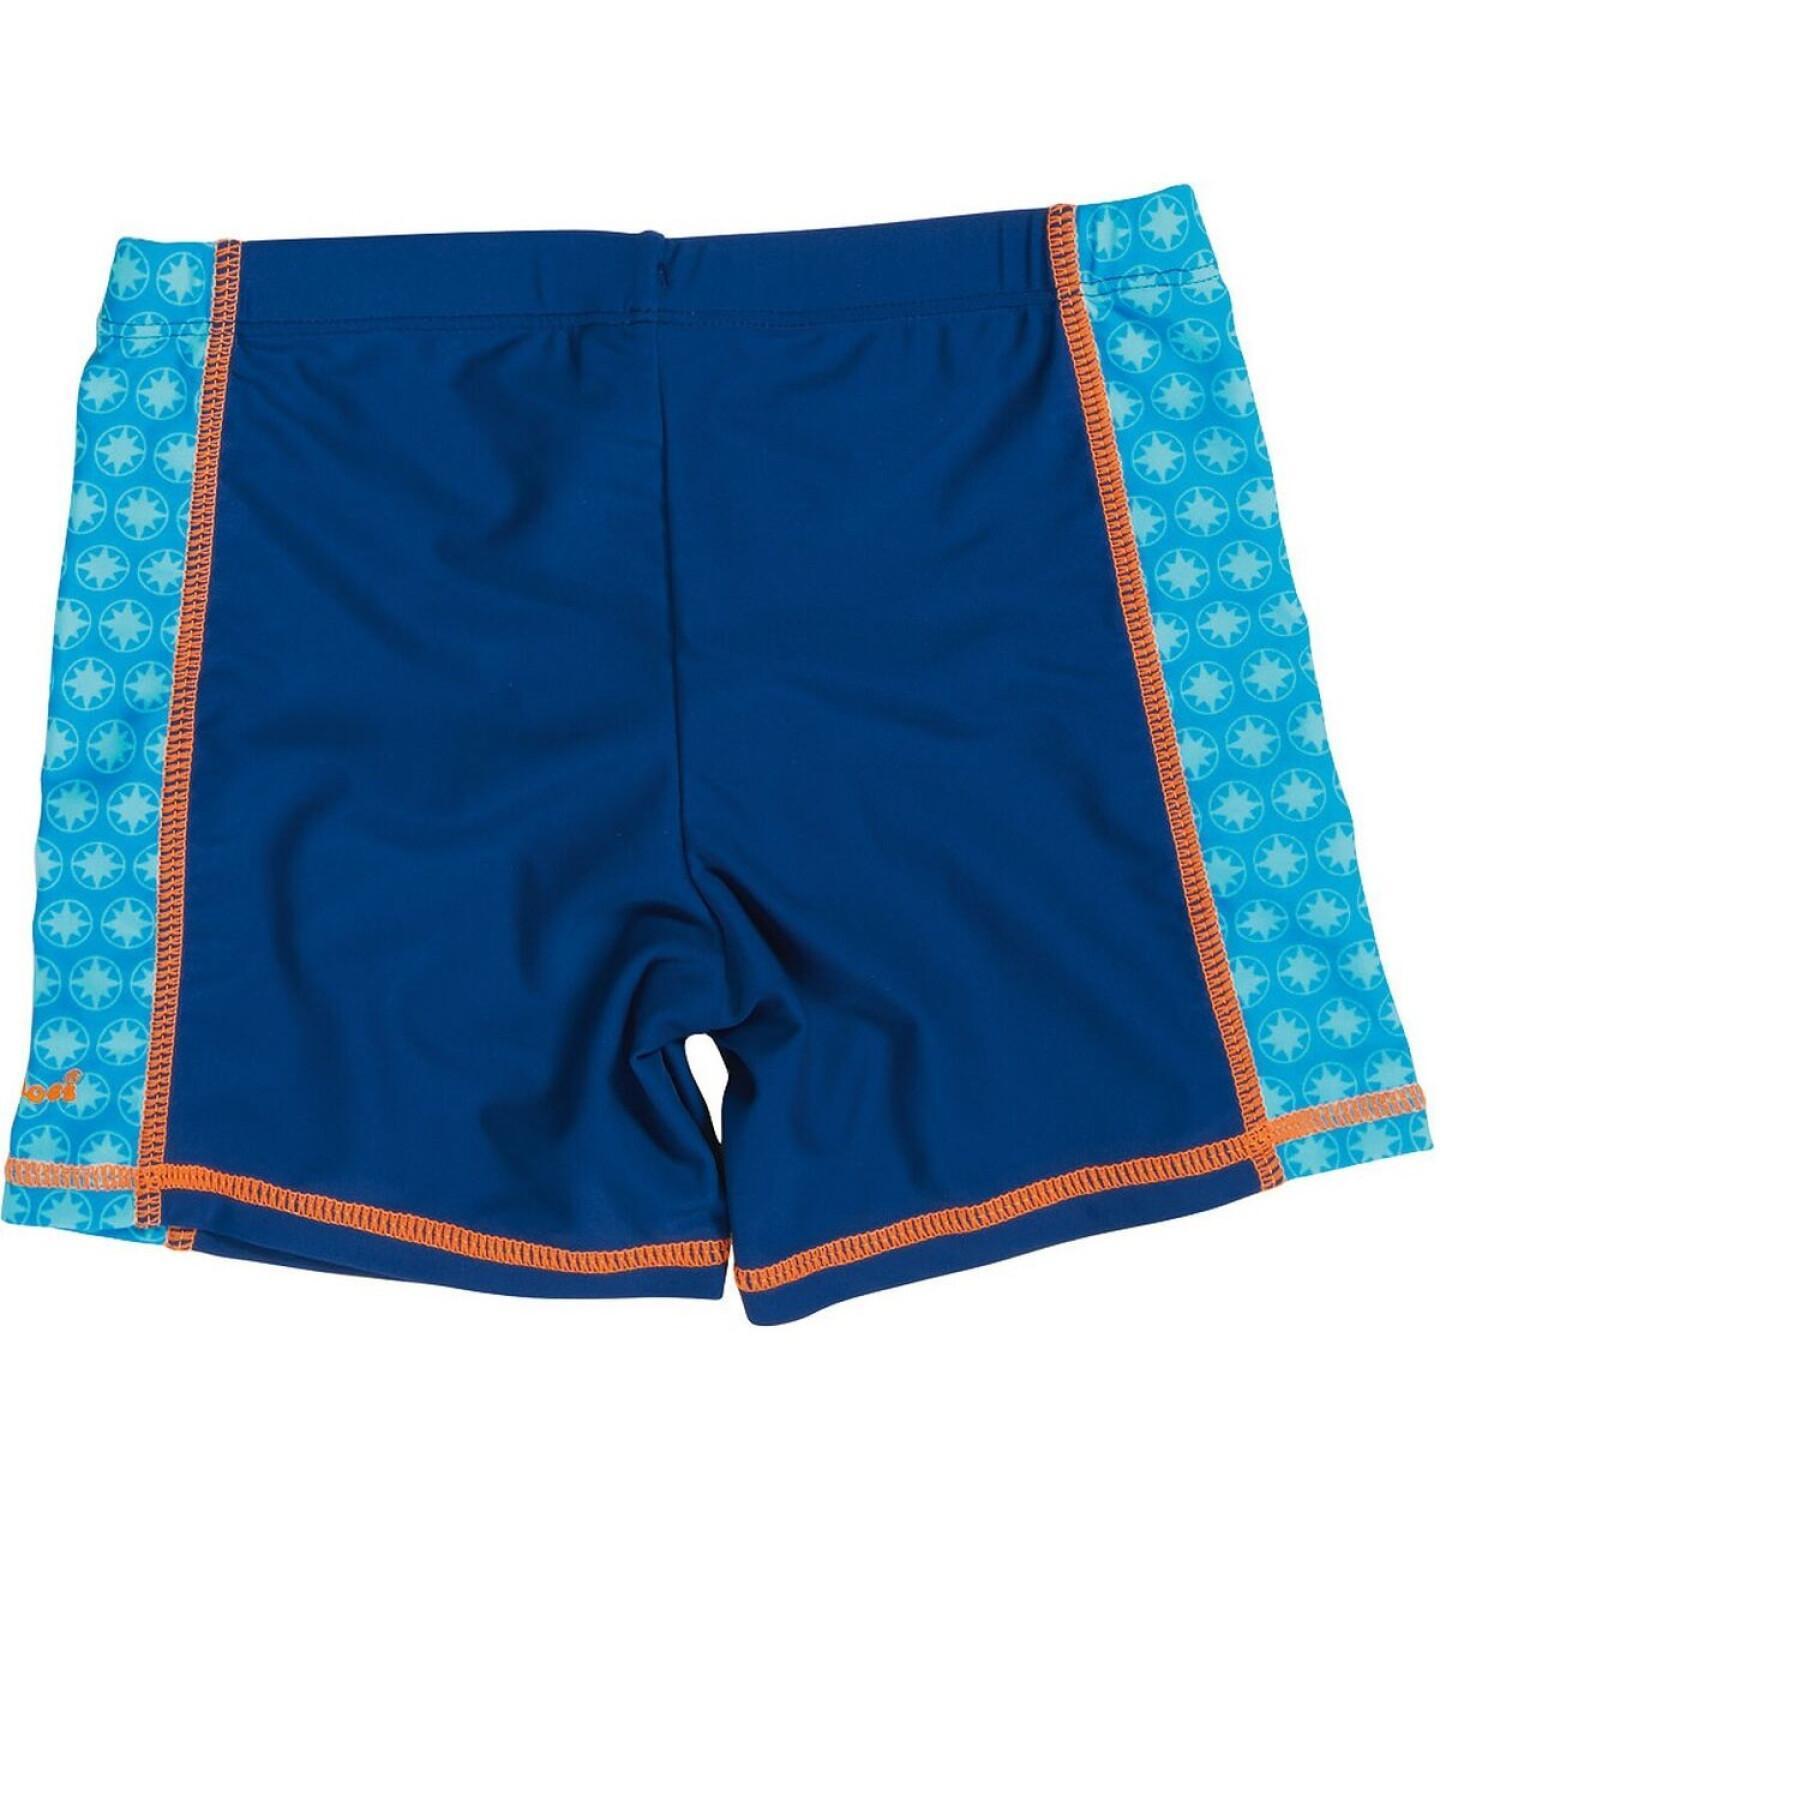 Children's swim shorts with uv protection Playshoes Die Maus